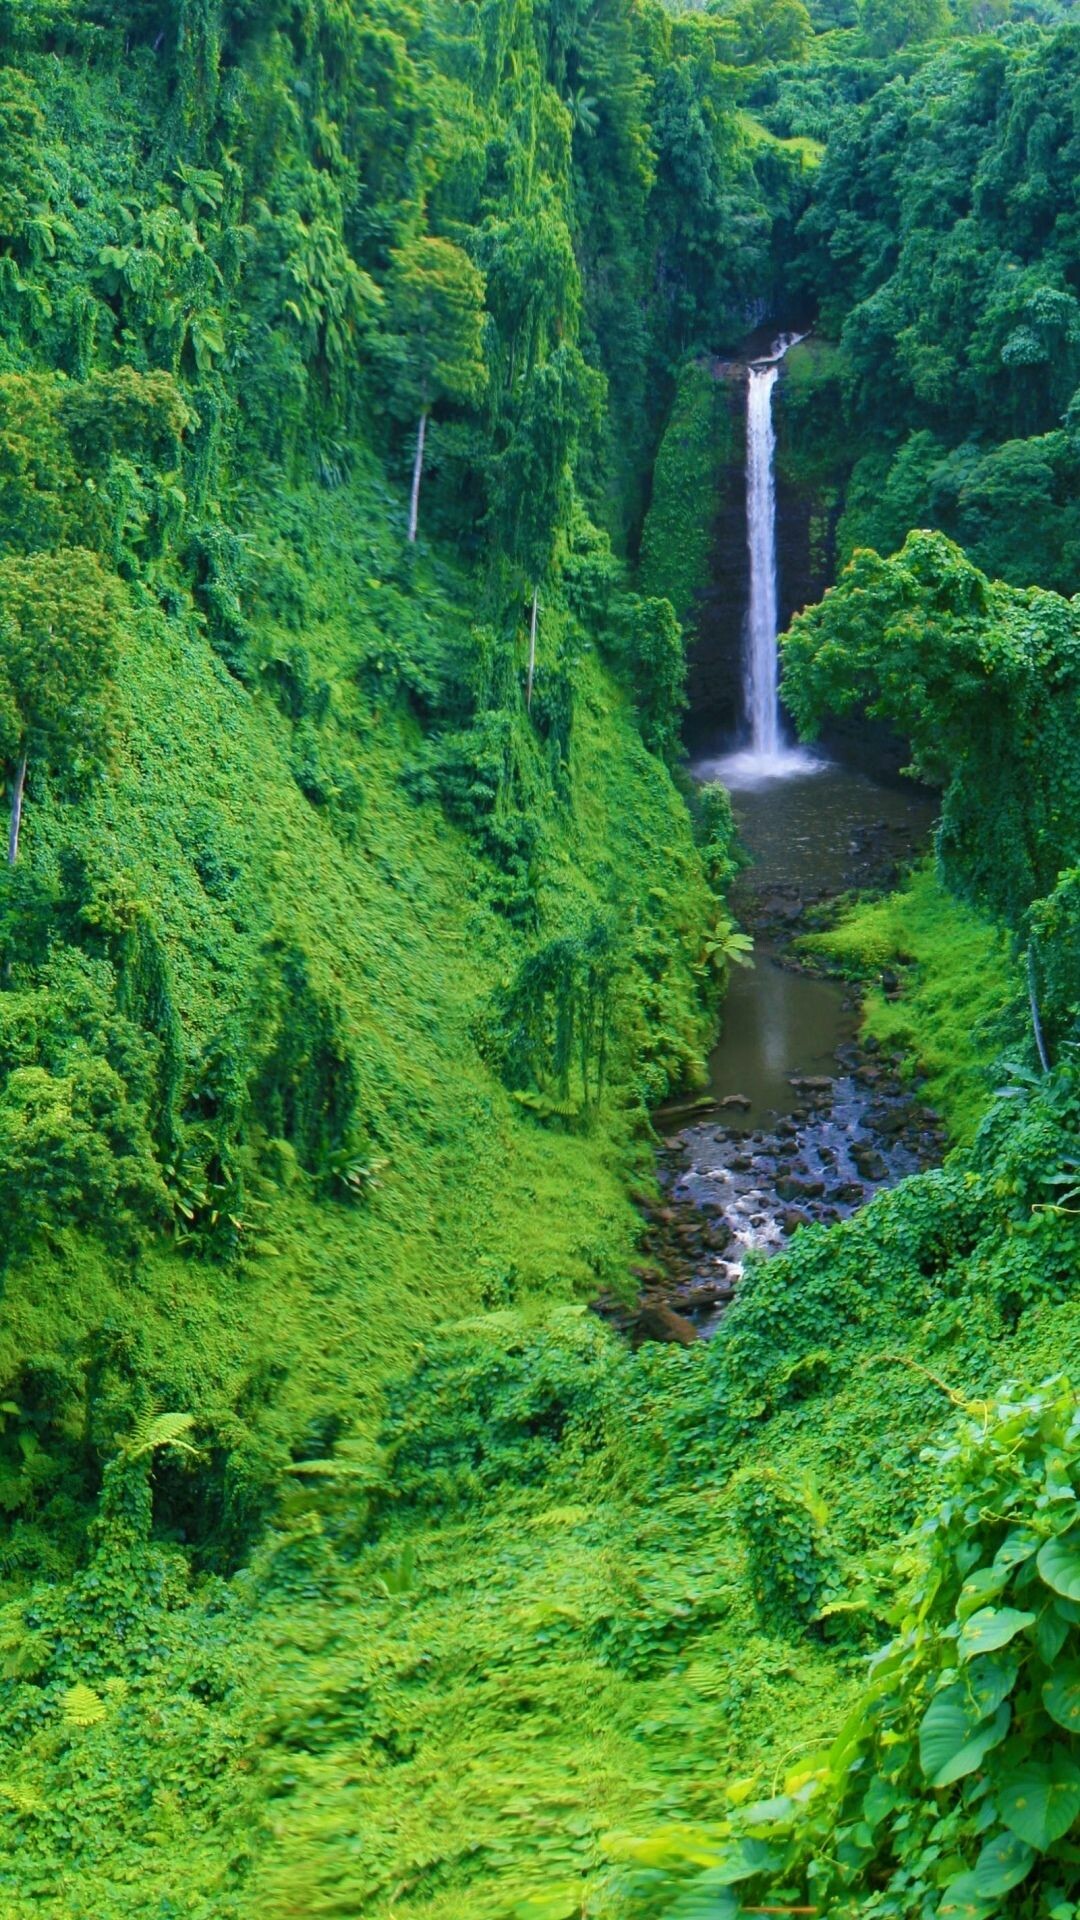 Jungle: Waterfall, Rain forests, Wilderness, Wild, Bush, Isolated place. 1080x1920 Full HD Wallpaper.